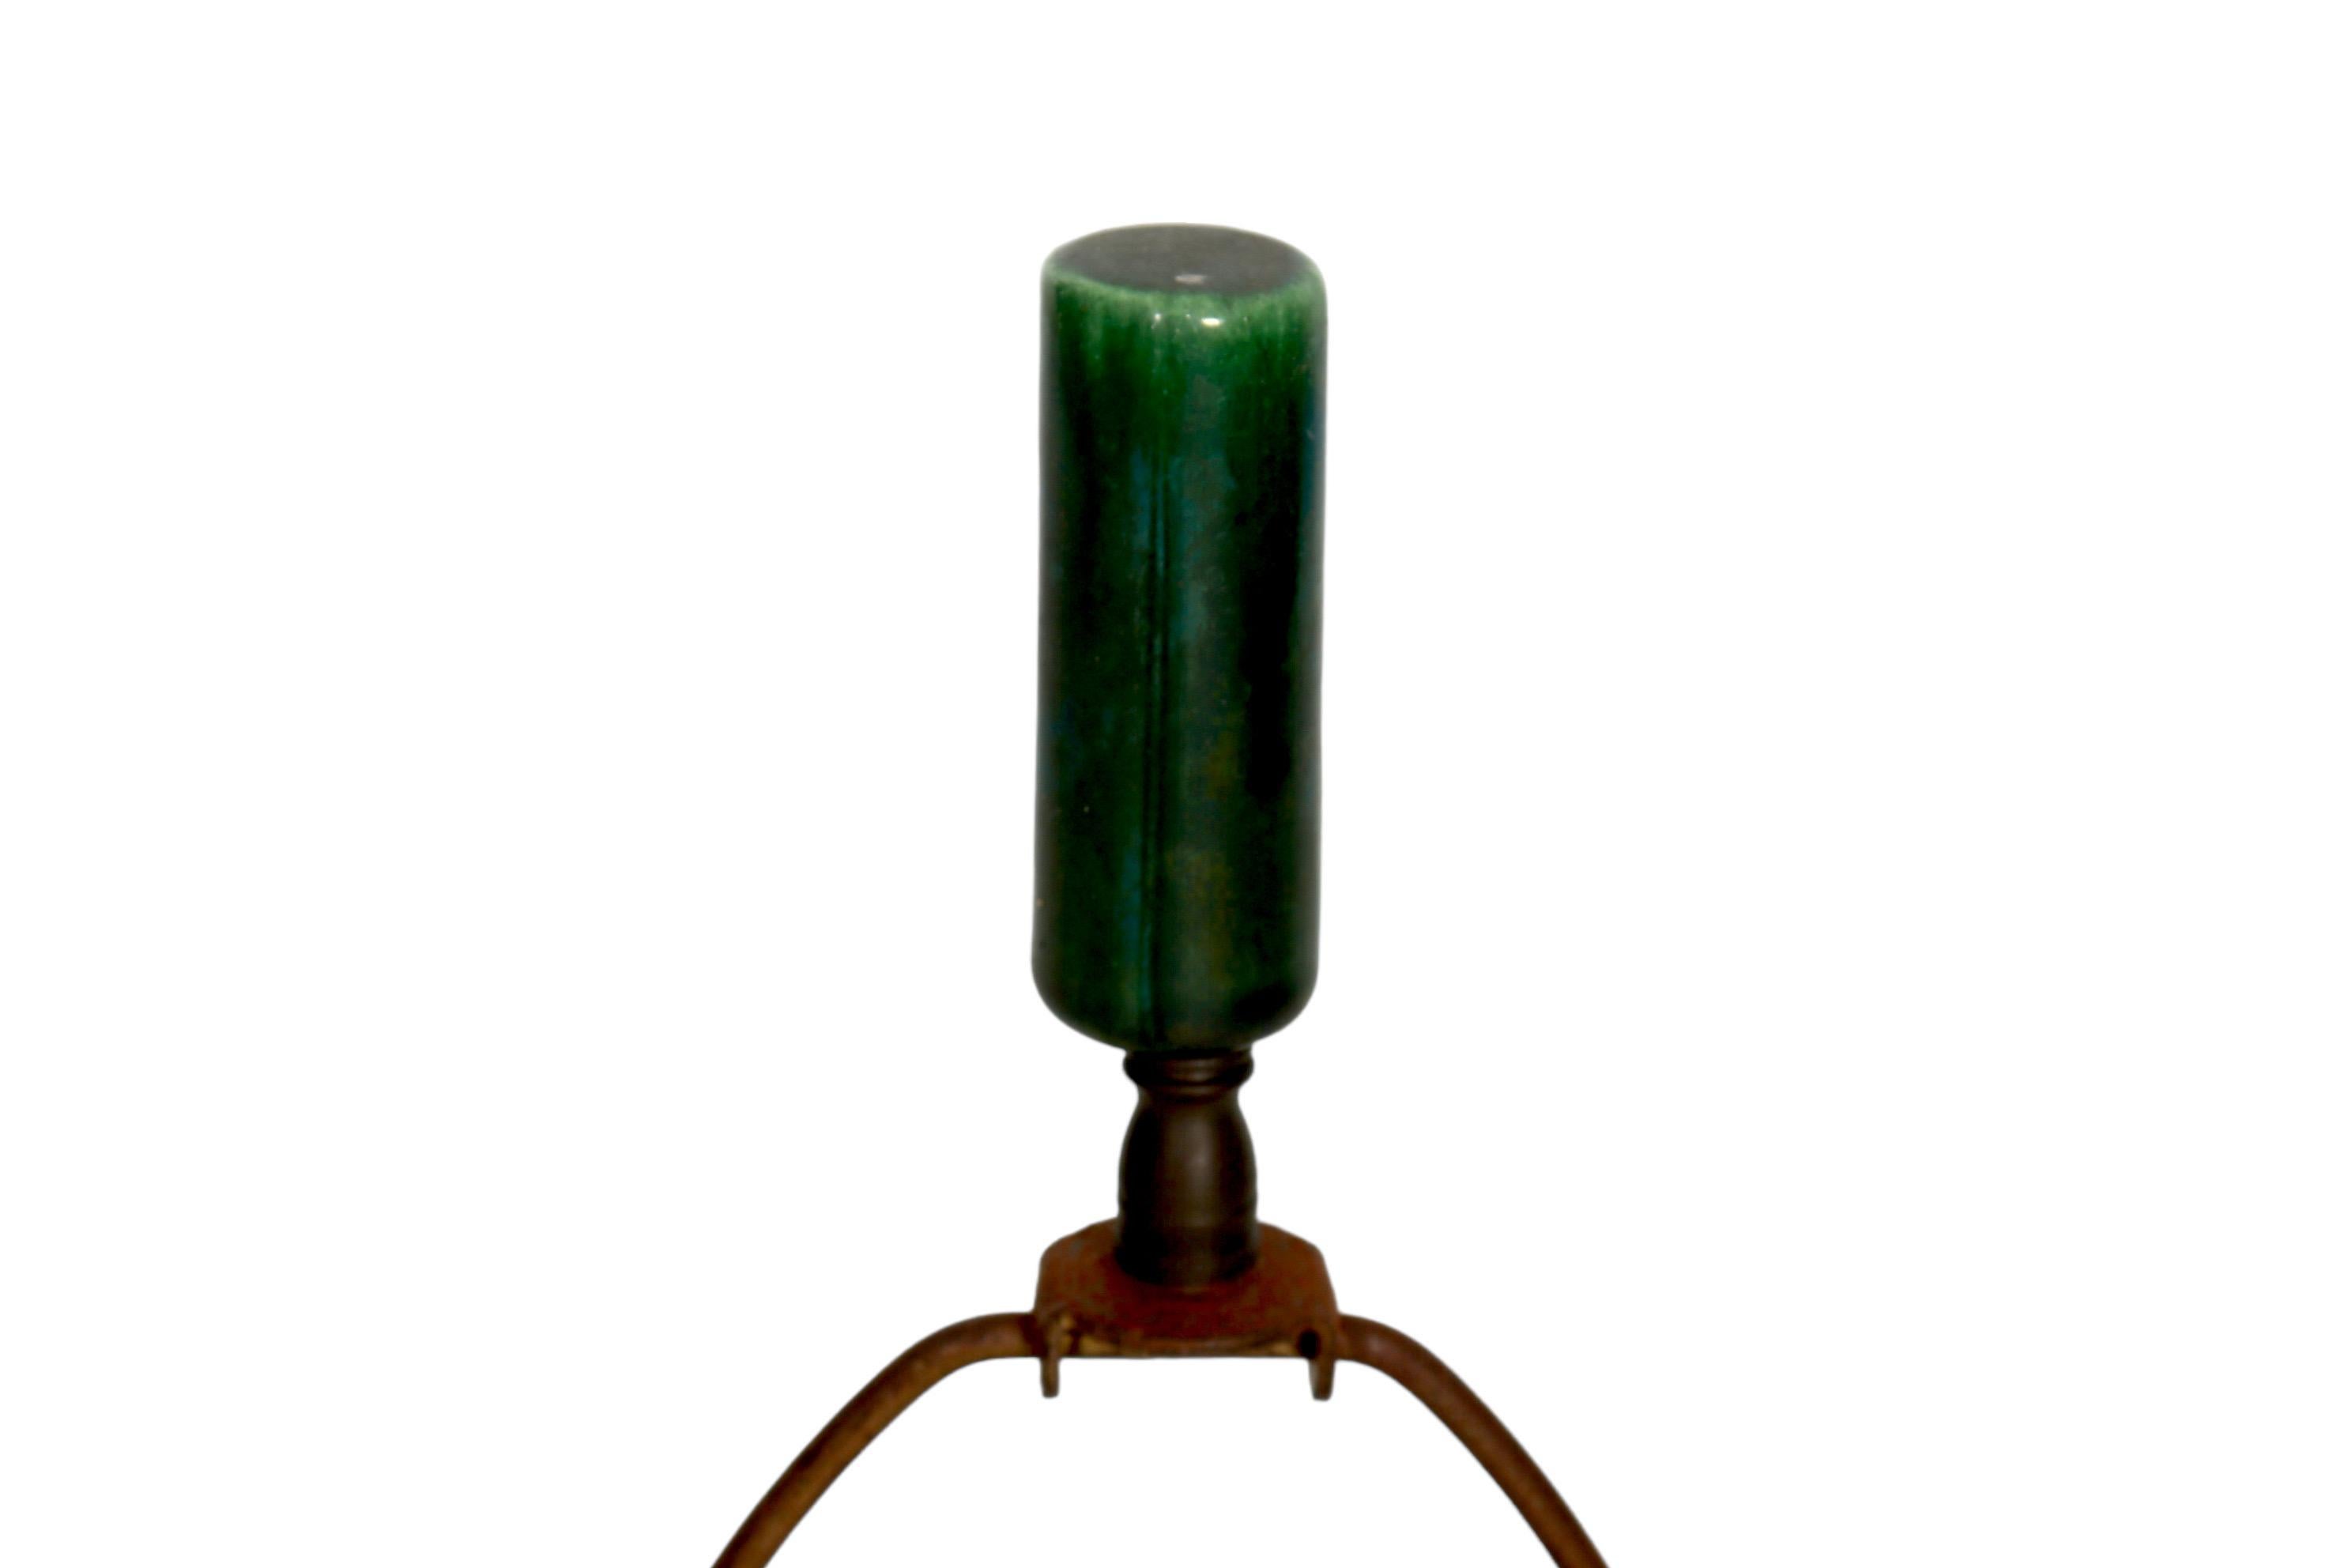 An emerald green, atomic style ceramic table lamp. Shaped like a cactus, with a reeded vase and a decorative band around the base pressed to give the look of emerald cut jewels. Stands on three black wrought iron legs with scrolled feet. On top is a